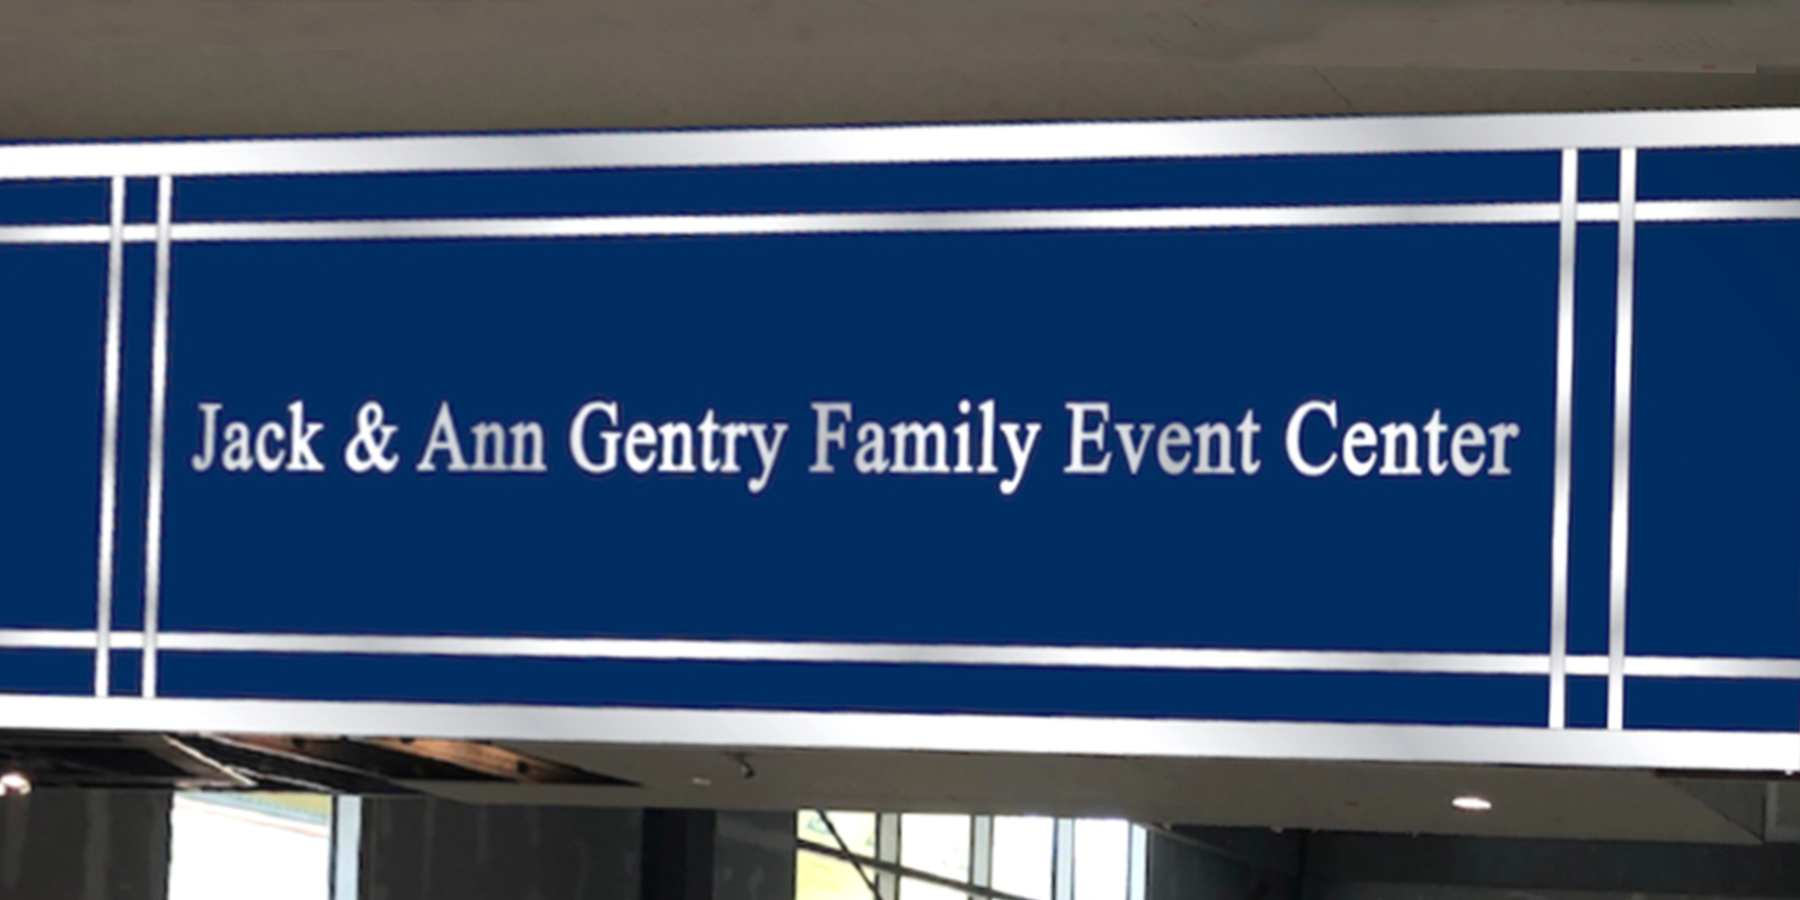 Jack and Ann Gentry Family Event Center